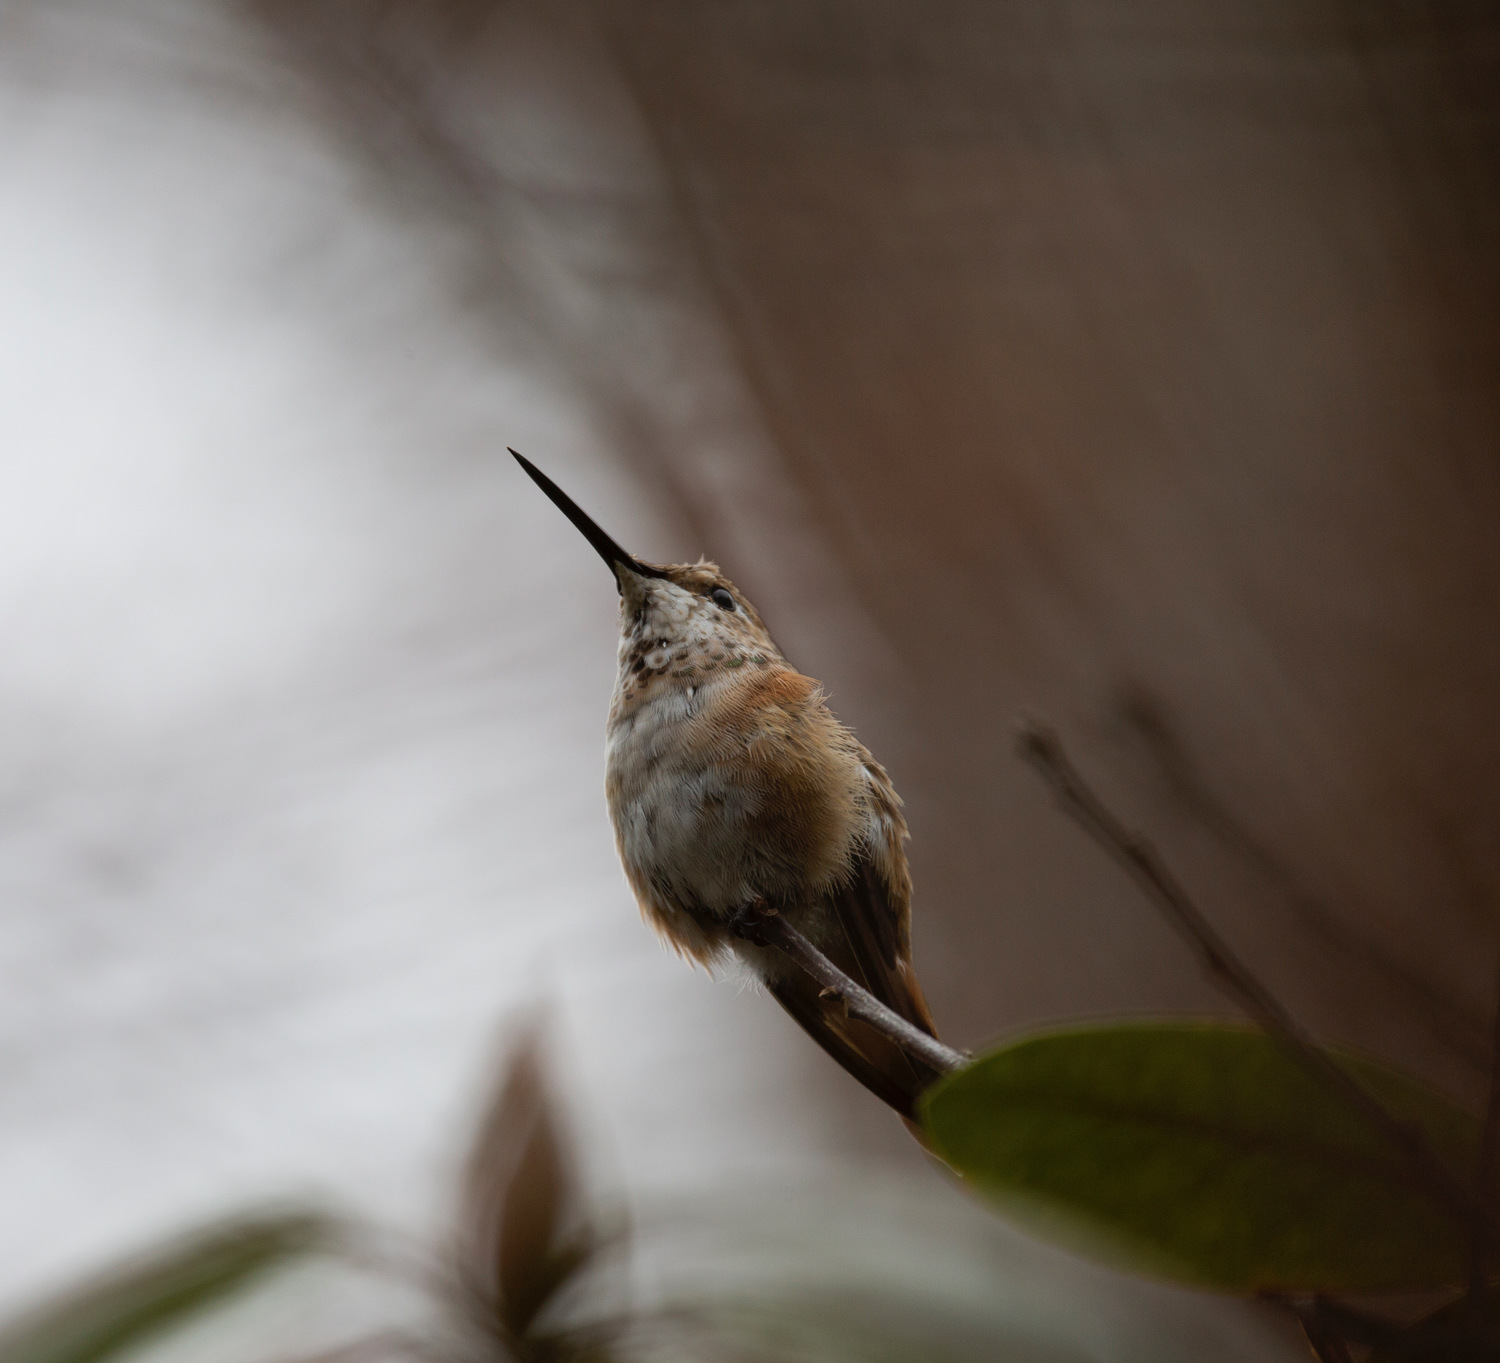 A rufous hummingbird, molting, in the Springs yard of Dr. Maria Bowling. Dr. Maria Bowling photograph